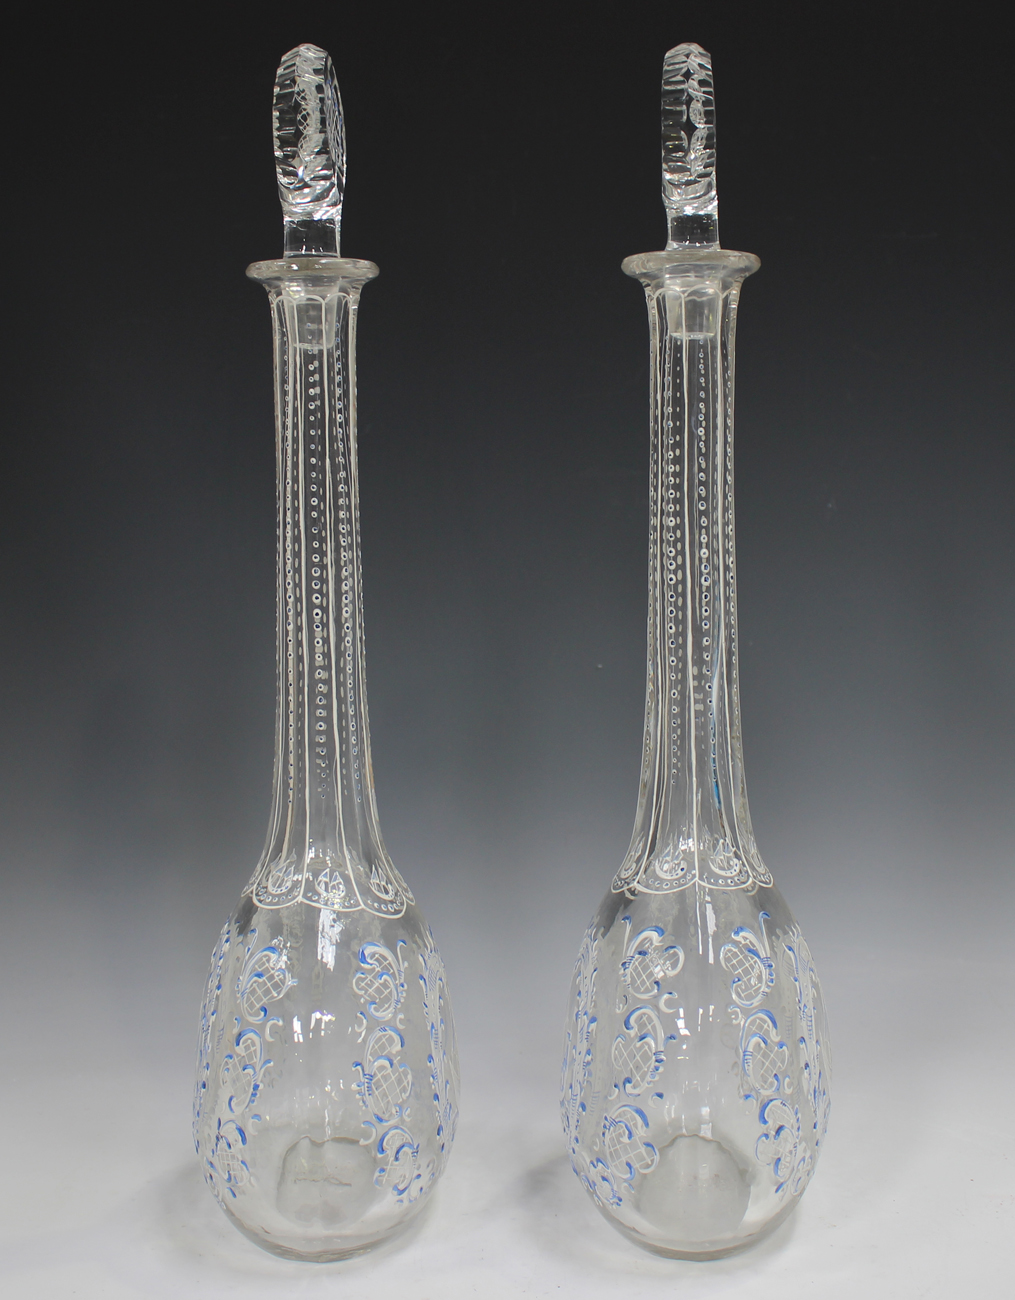 A pair of enamelled glass decanters and stoppers, 19th century, in Beilby style, each flattened - Image 7 of 7